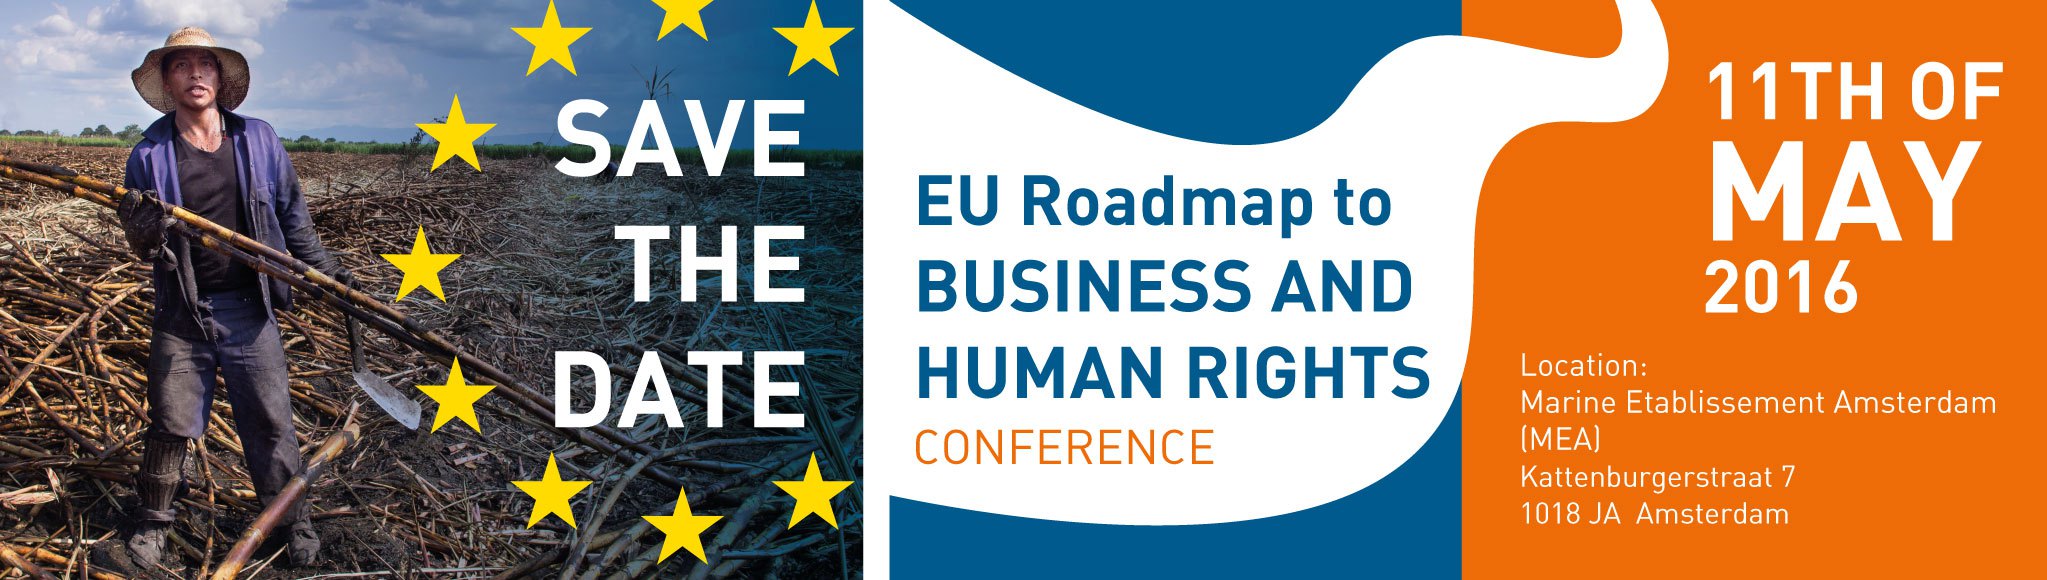 EU Roadmap to Business and Human Rights